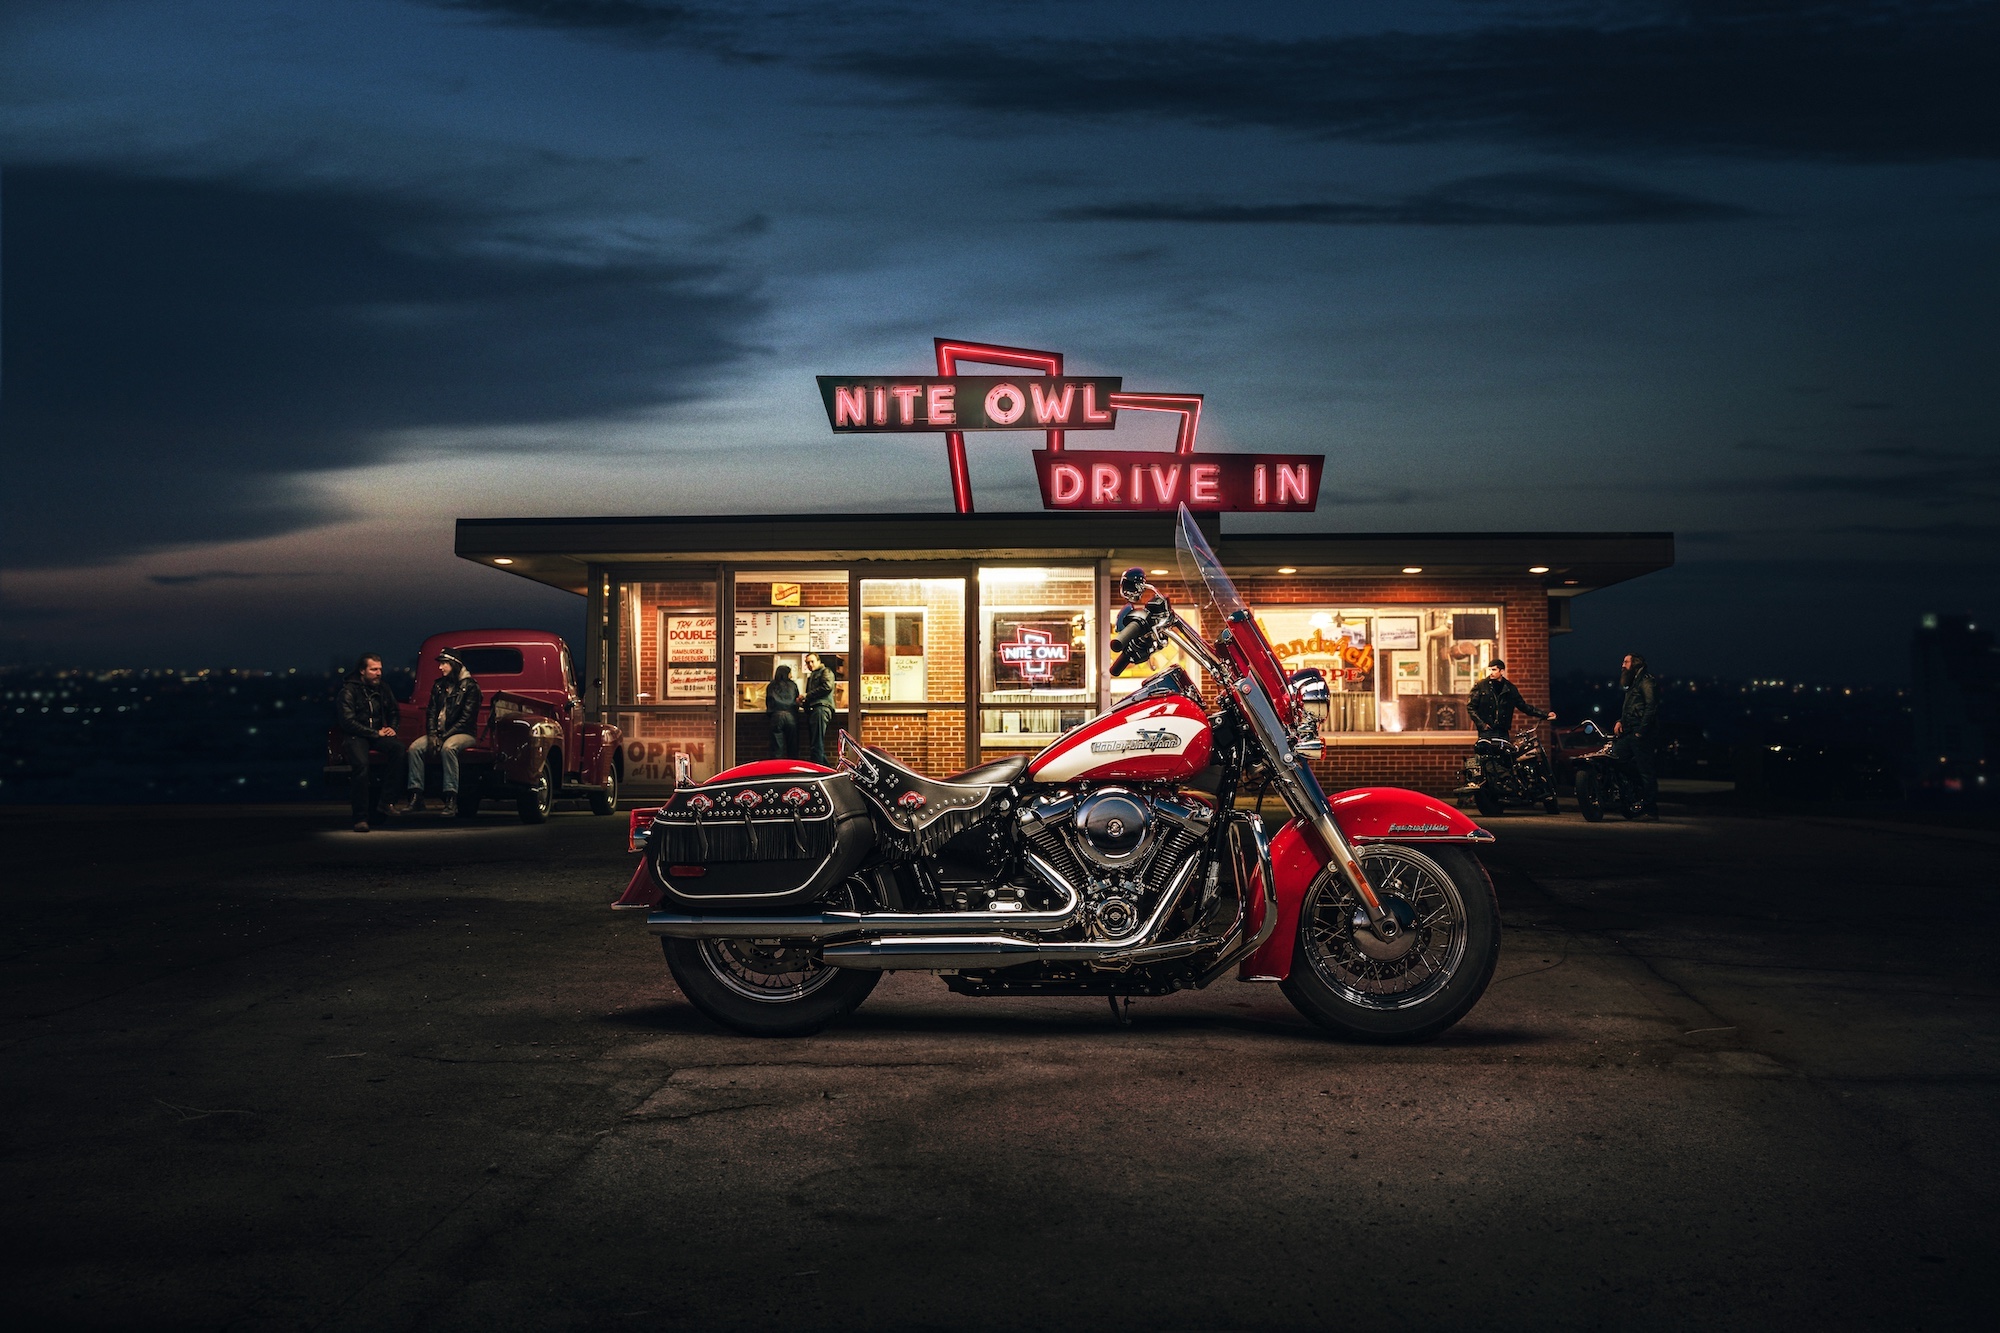 A Harley motorycle in front of a pub.